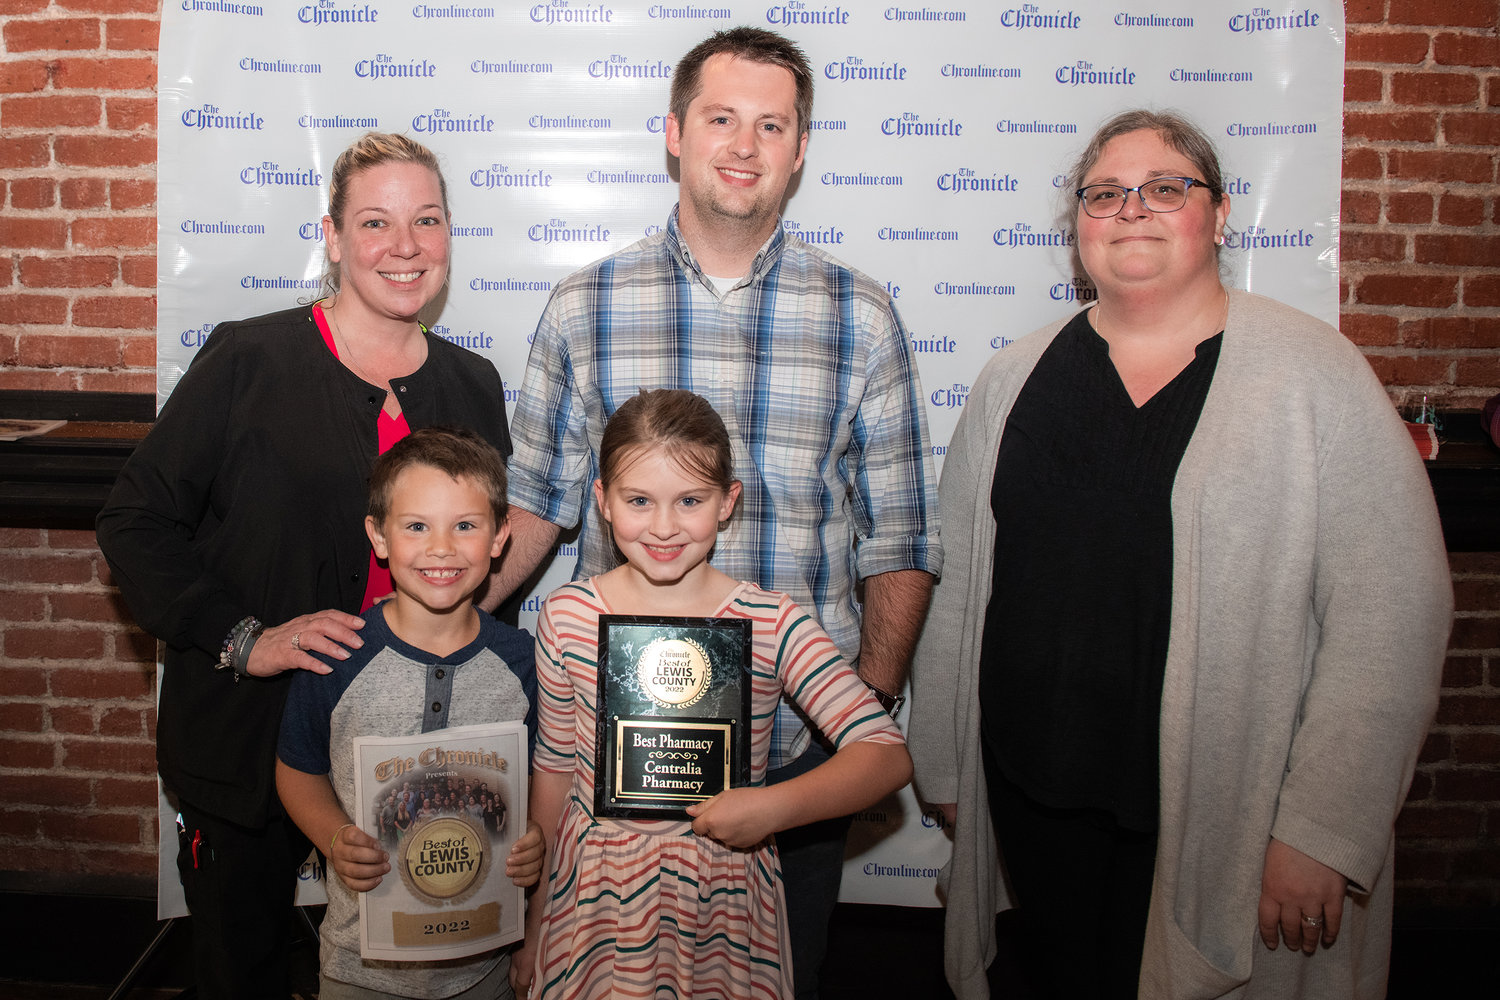 Centralia Pharmacy won “Best Pharmacy” during the 2022 Best of Lewis County event hosted by The Chronicle at The Juice Box Thursday evening in Centralia.